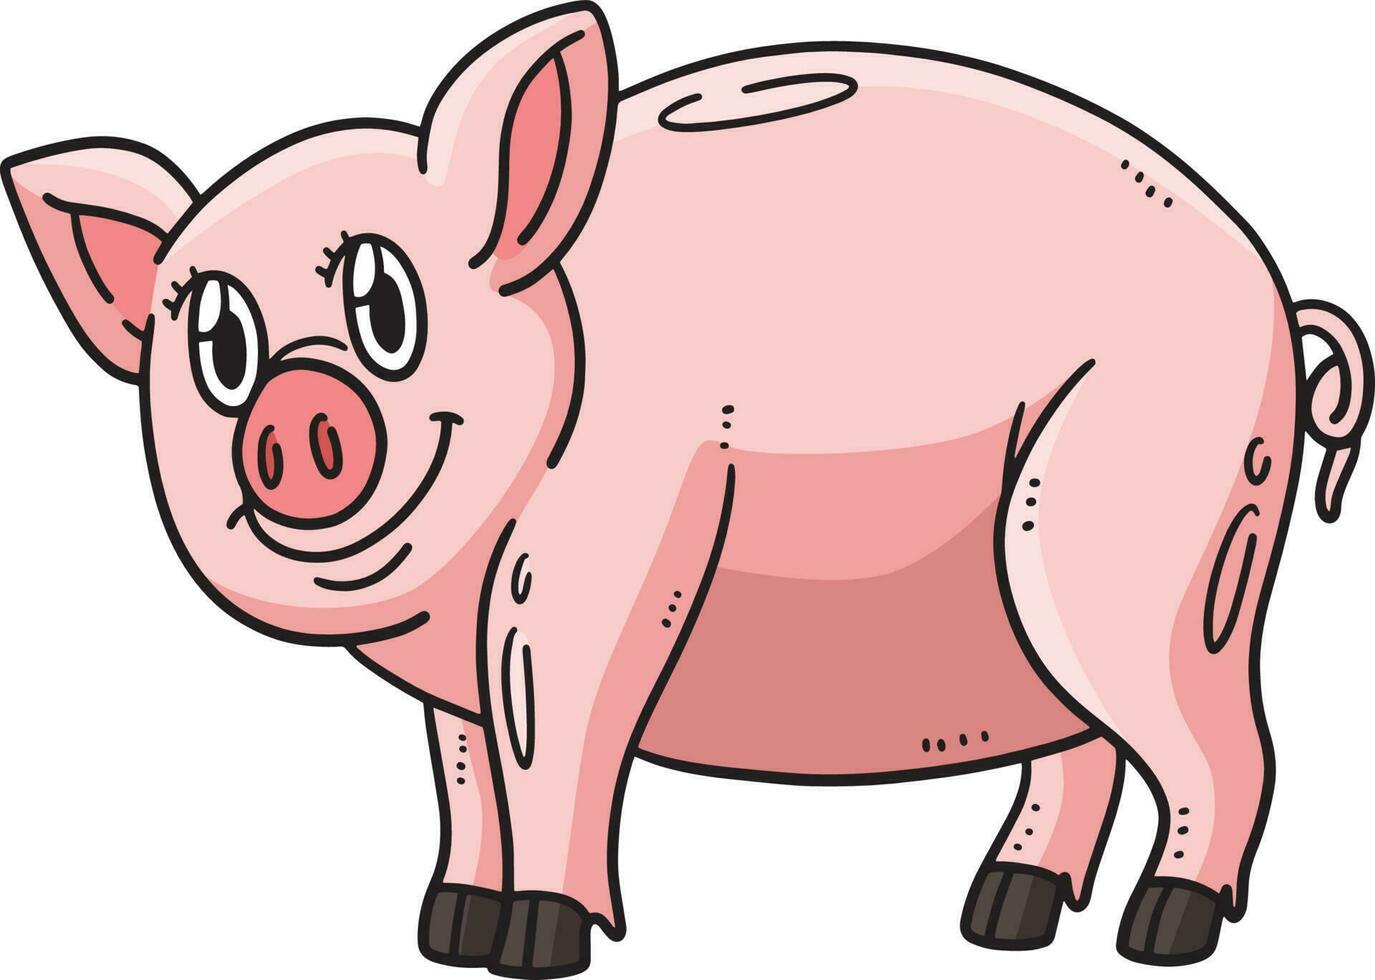 Mother Pig Cartoon Colored Clipart Illustration vector